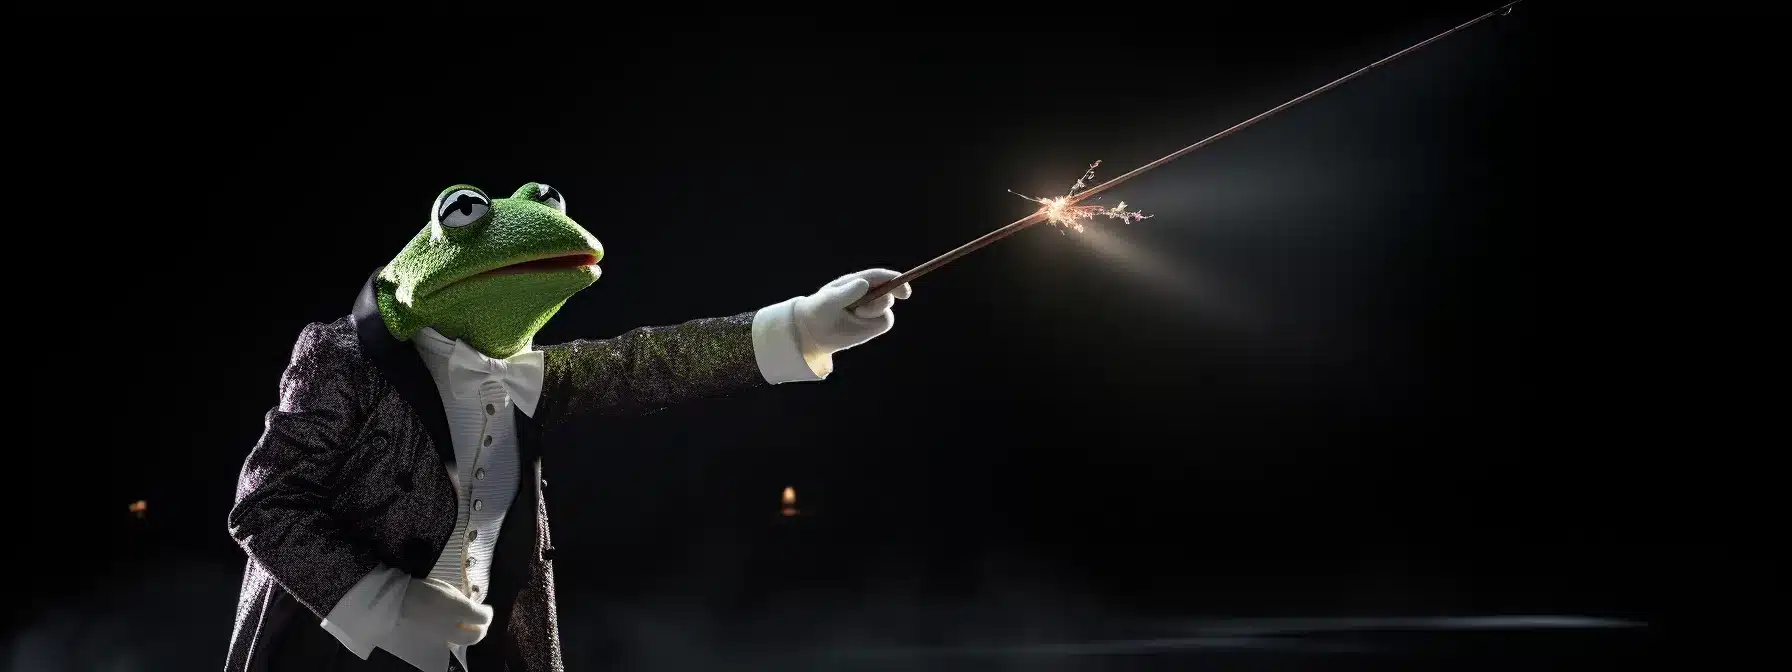 A Brand Manager Waving A Magic Wand To Transform A Frog Into A Prince.